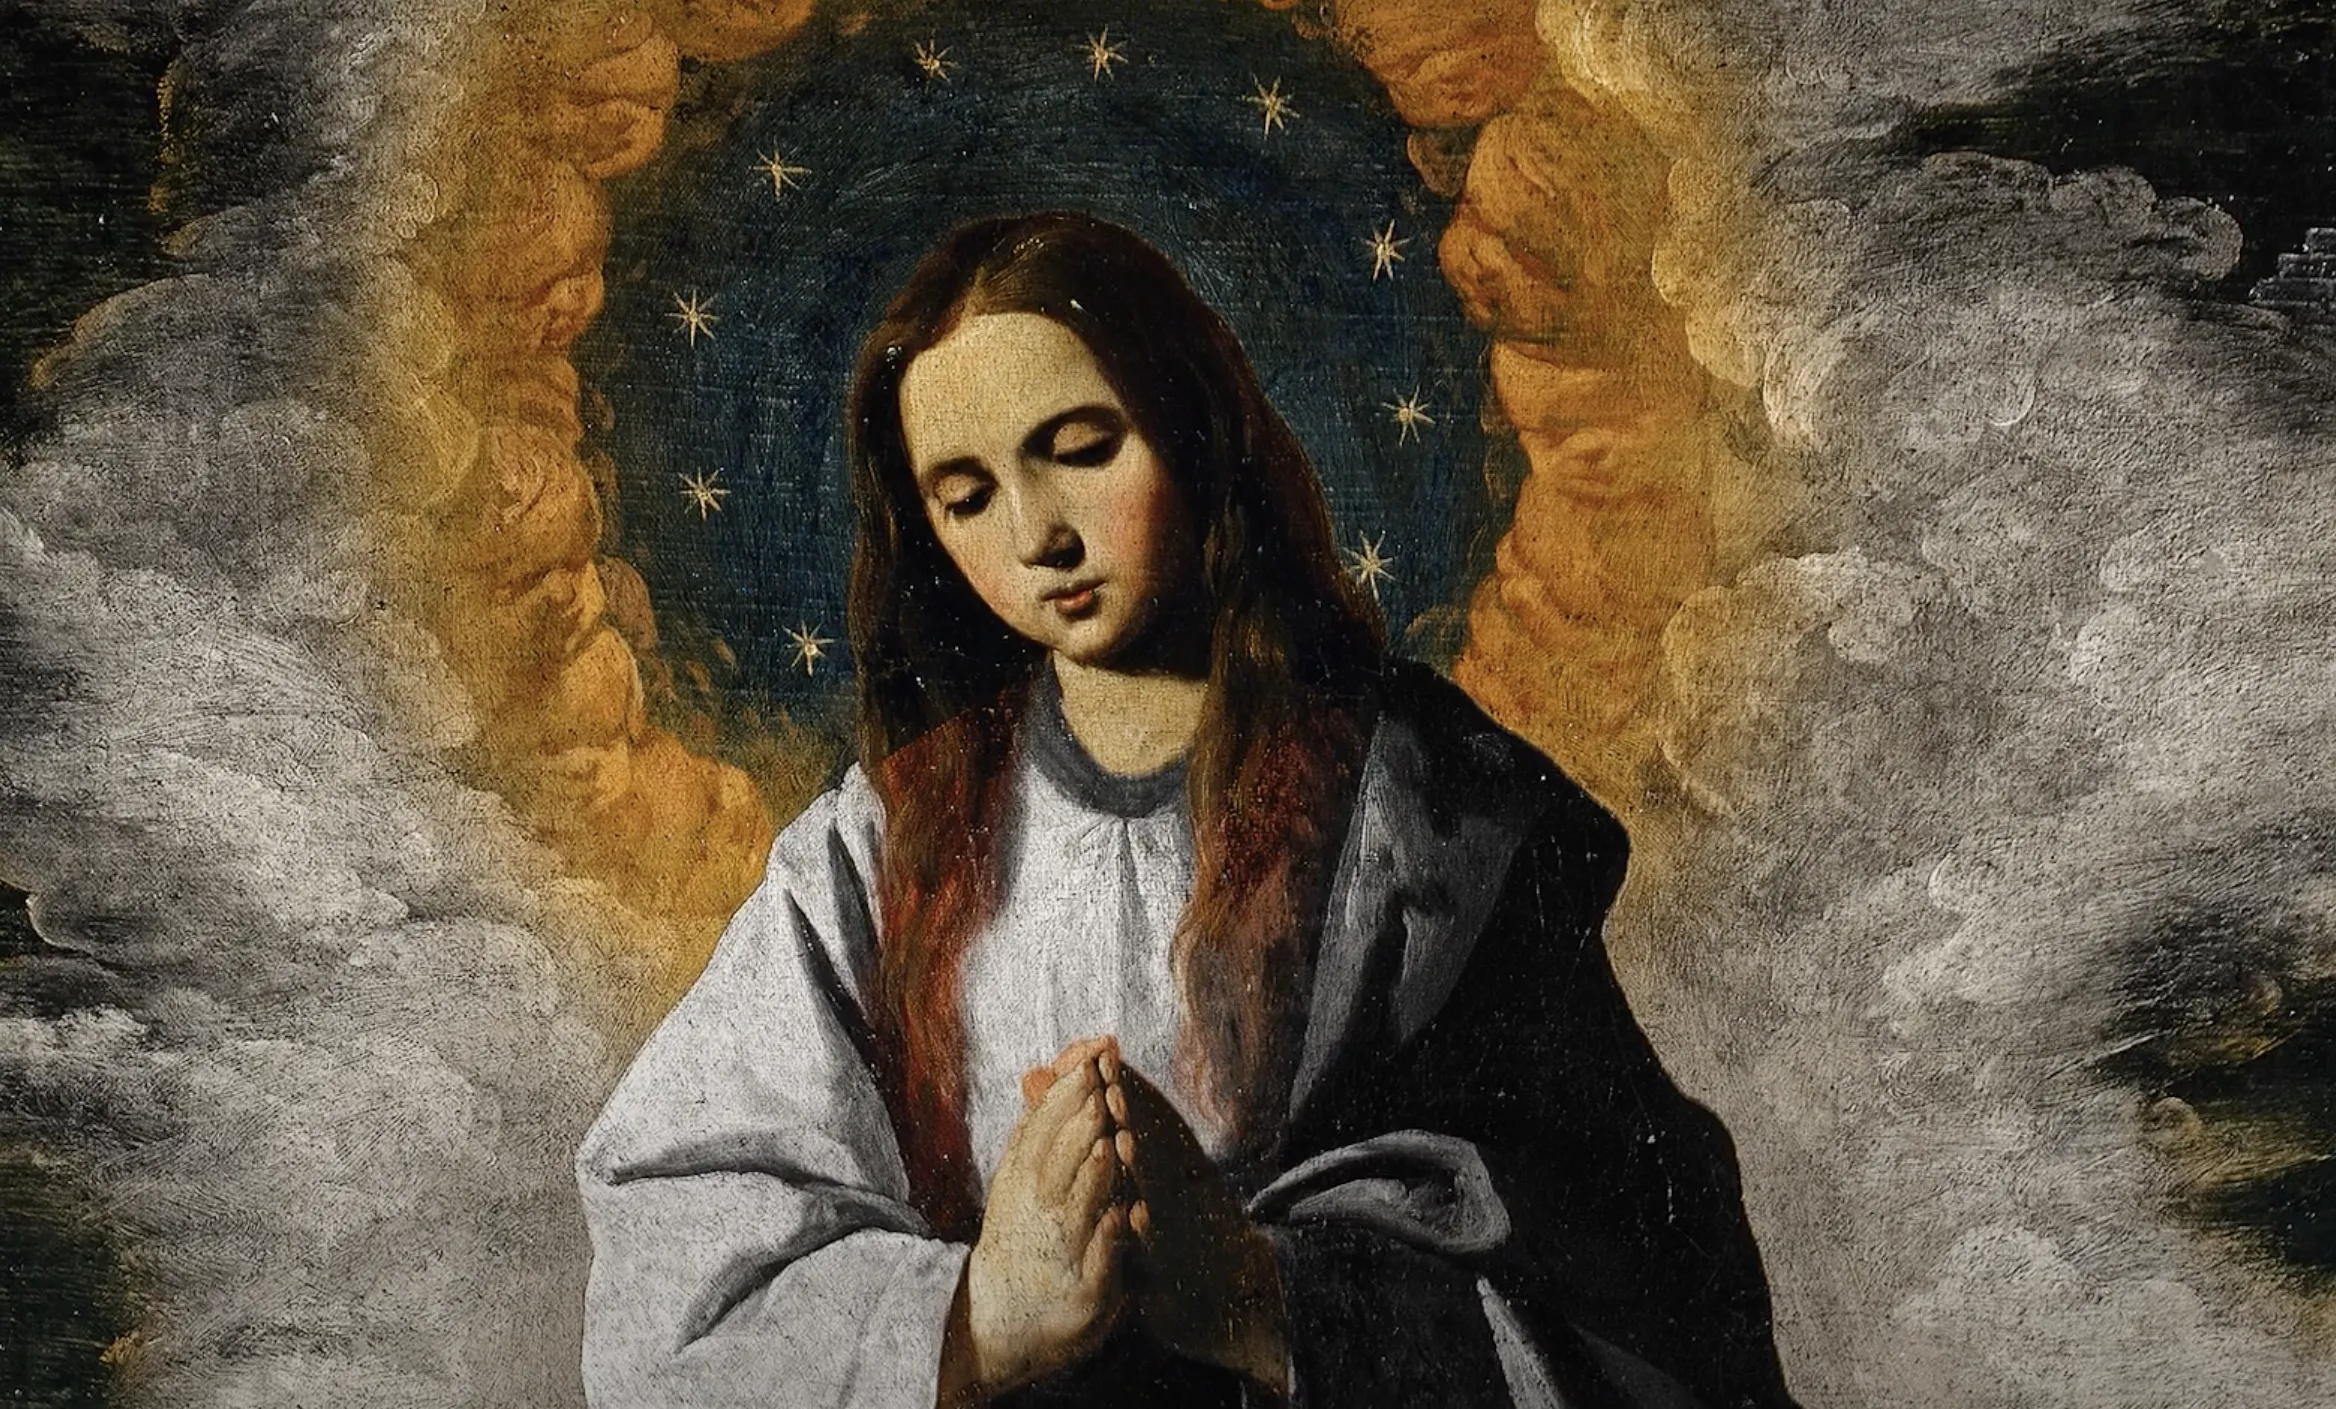 A detail from Francisco de Zurbarán’s painting “The Immaculate Conception” (1628–1630)?w=200&h=150